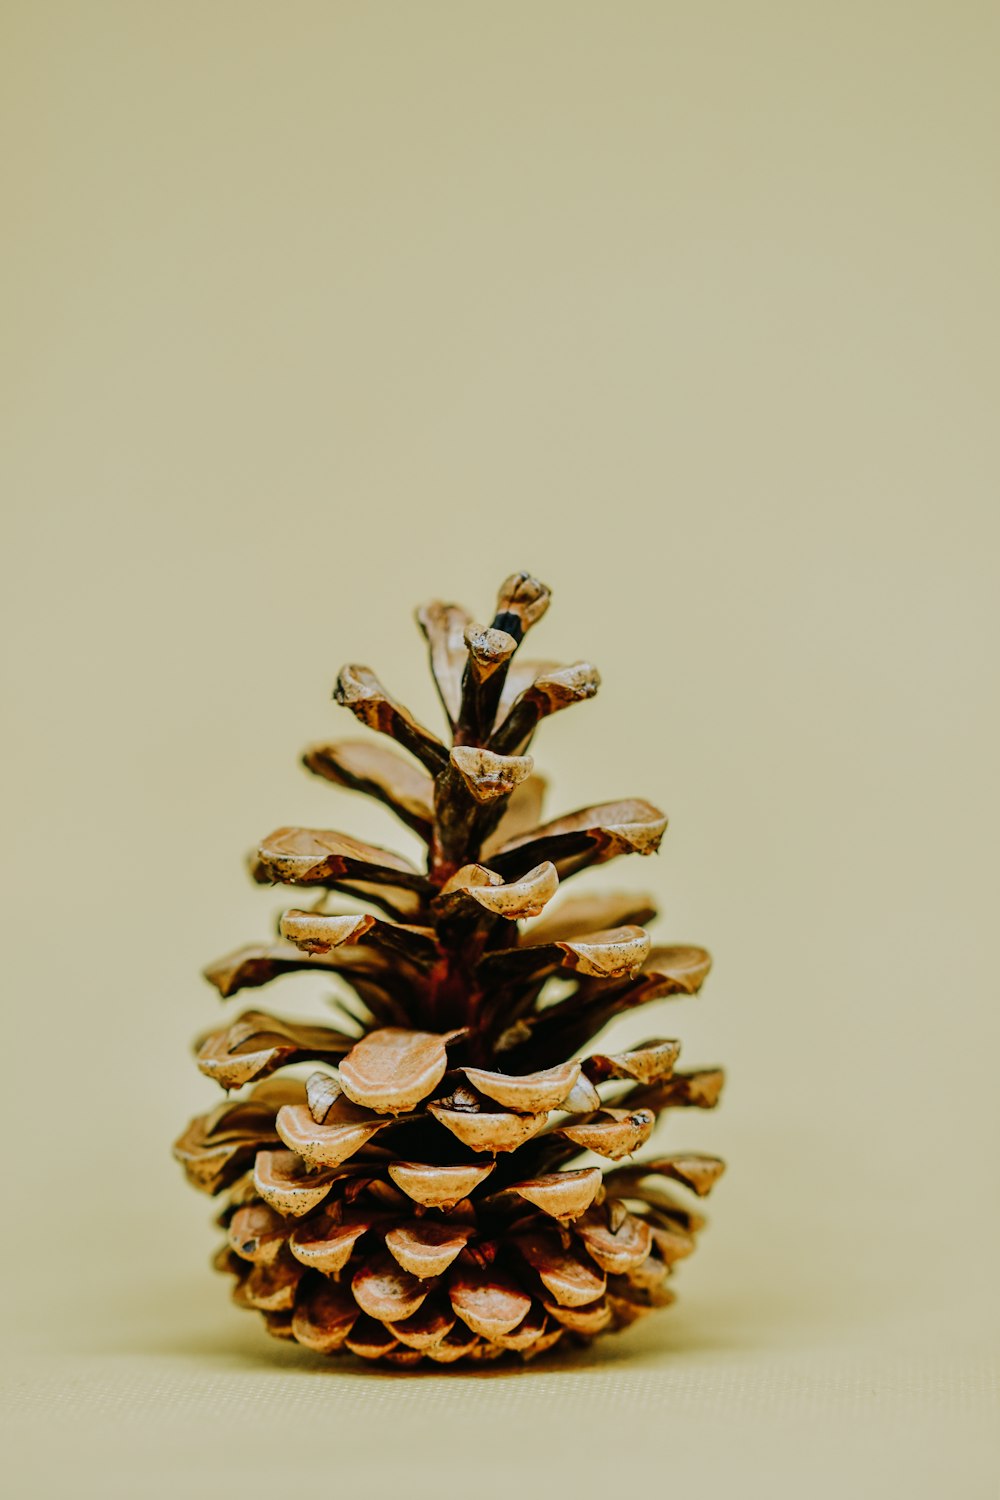 Small Pine Cones in the Wild Stock Image - Image of environment, brown:  162293947